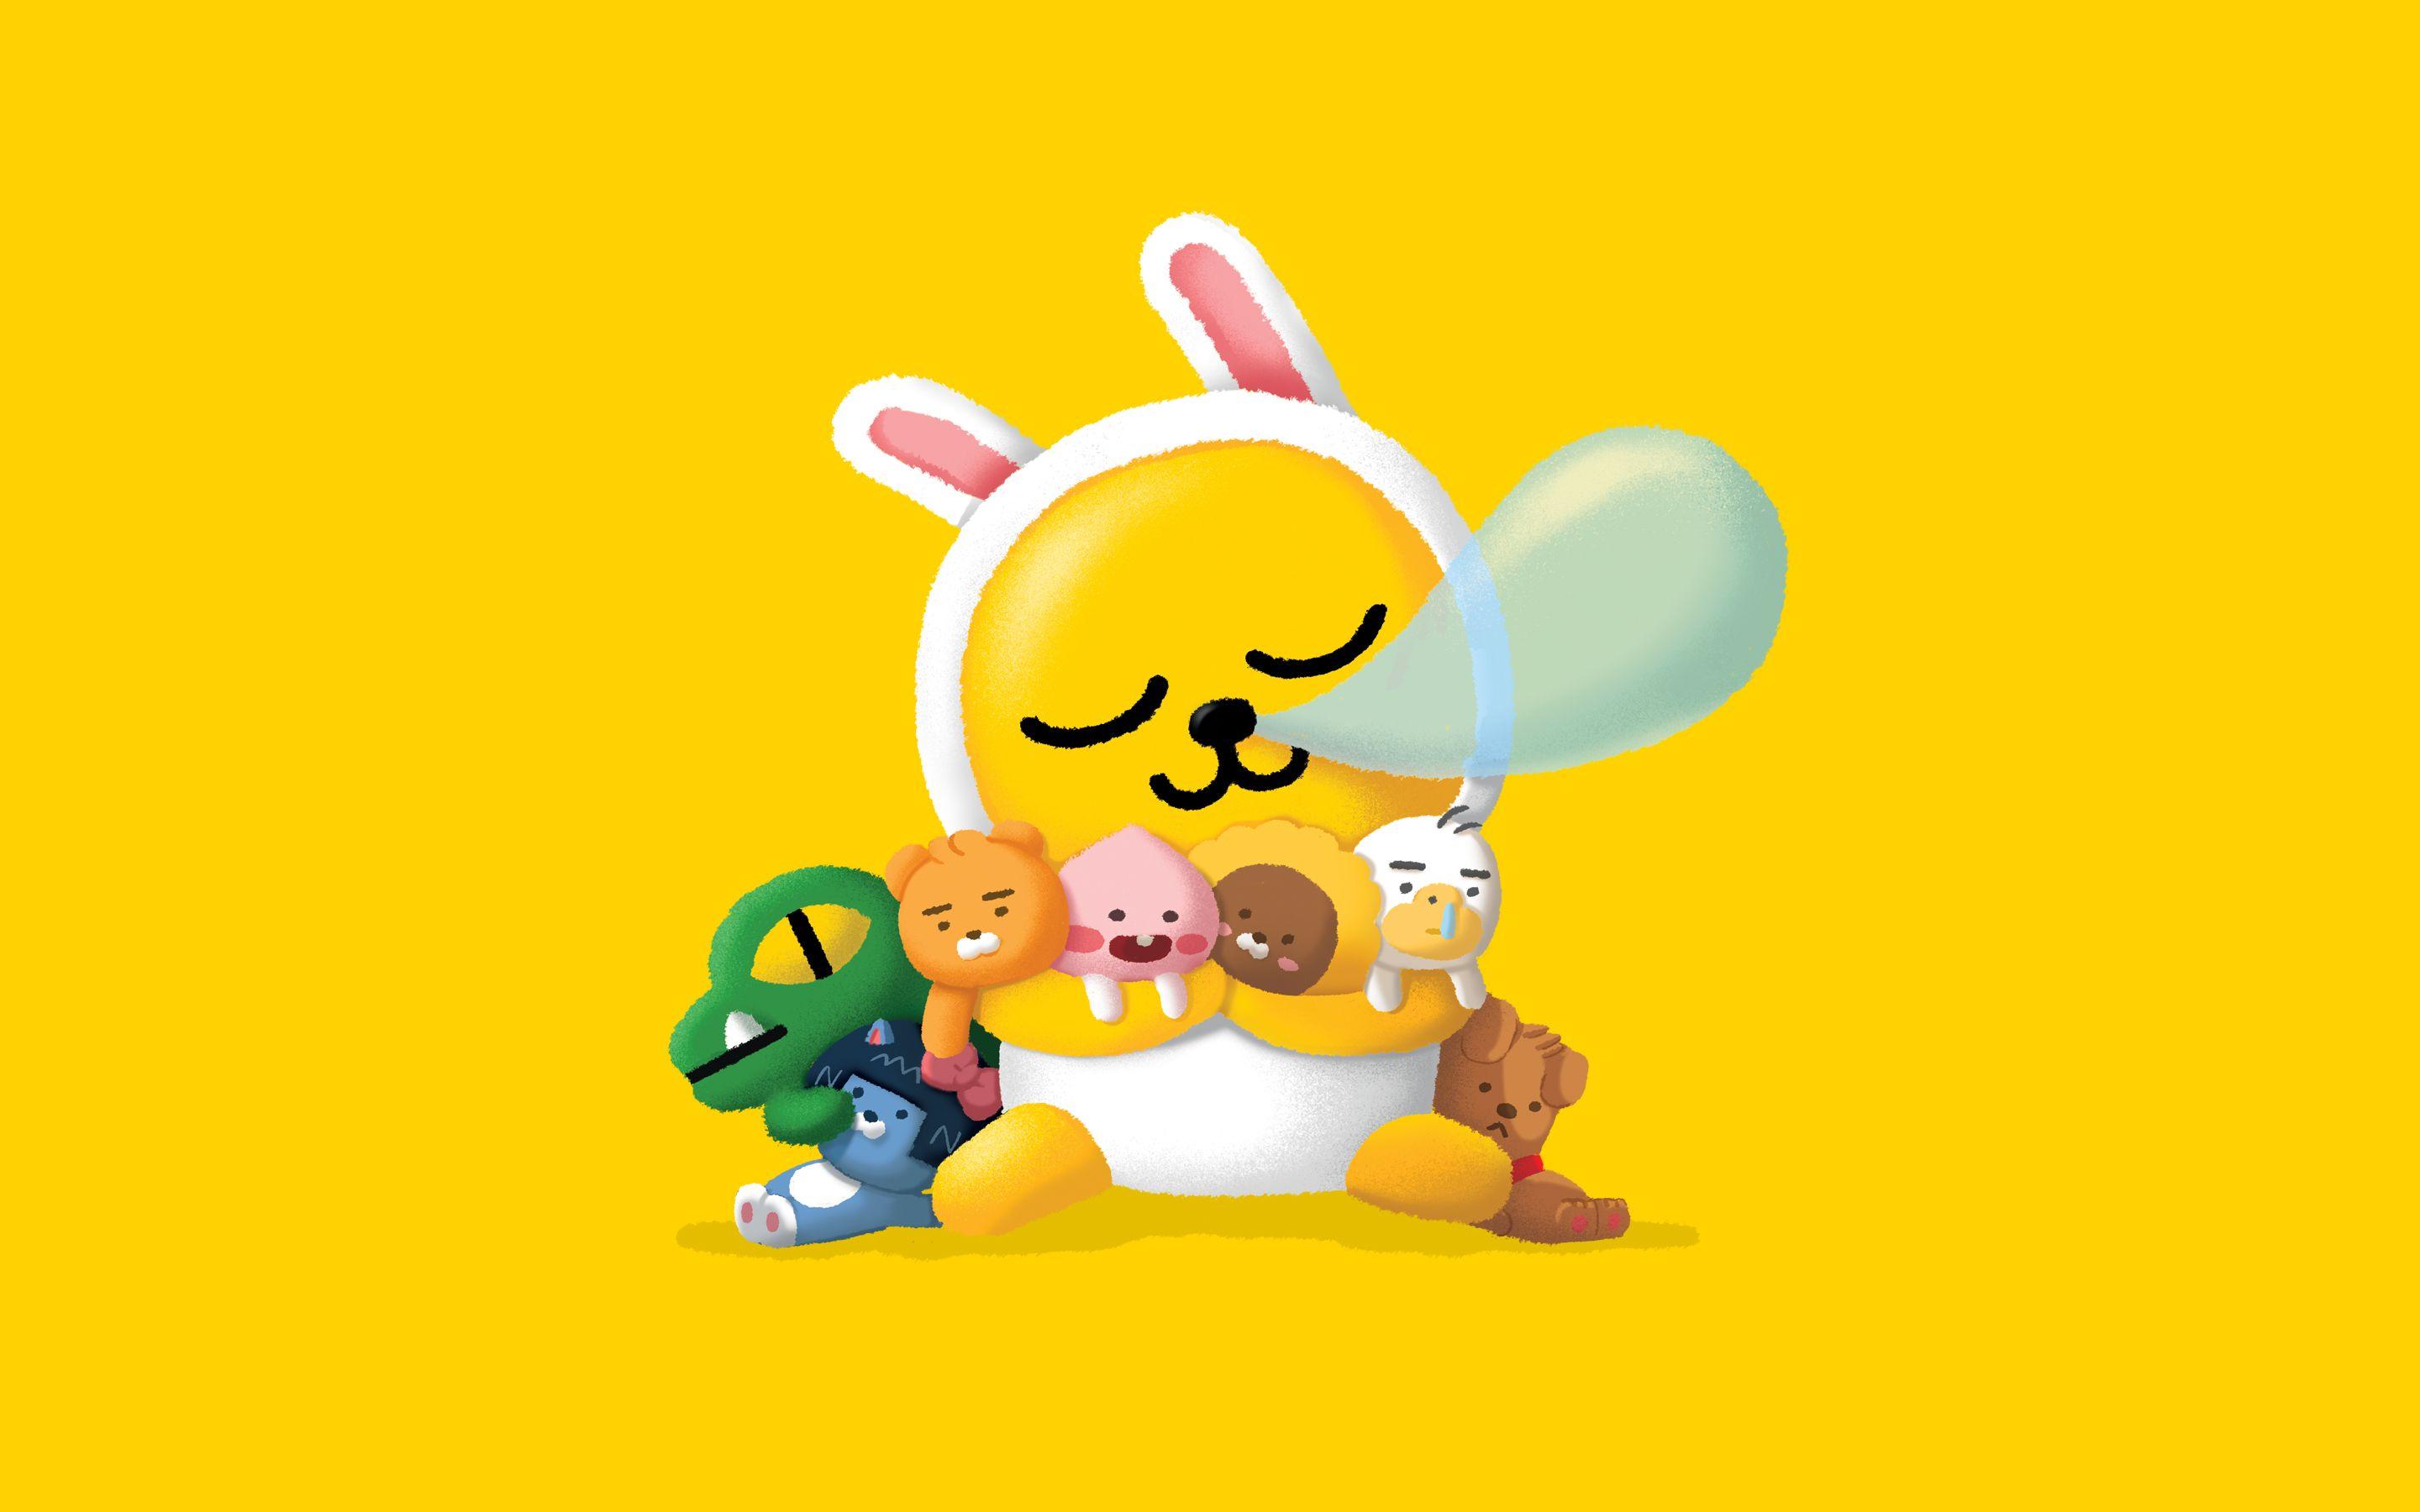 Con Kakao Friends Wallpapers Top Free Con Kakao Friends Backgrounds Wallpaperaccess 9503